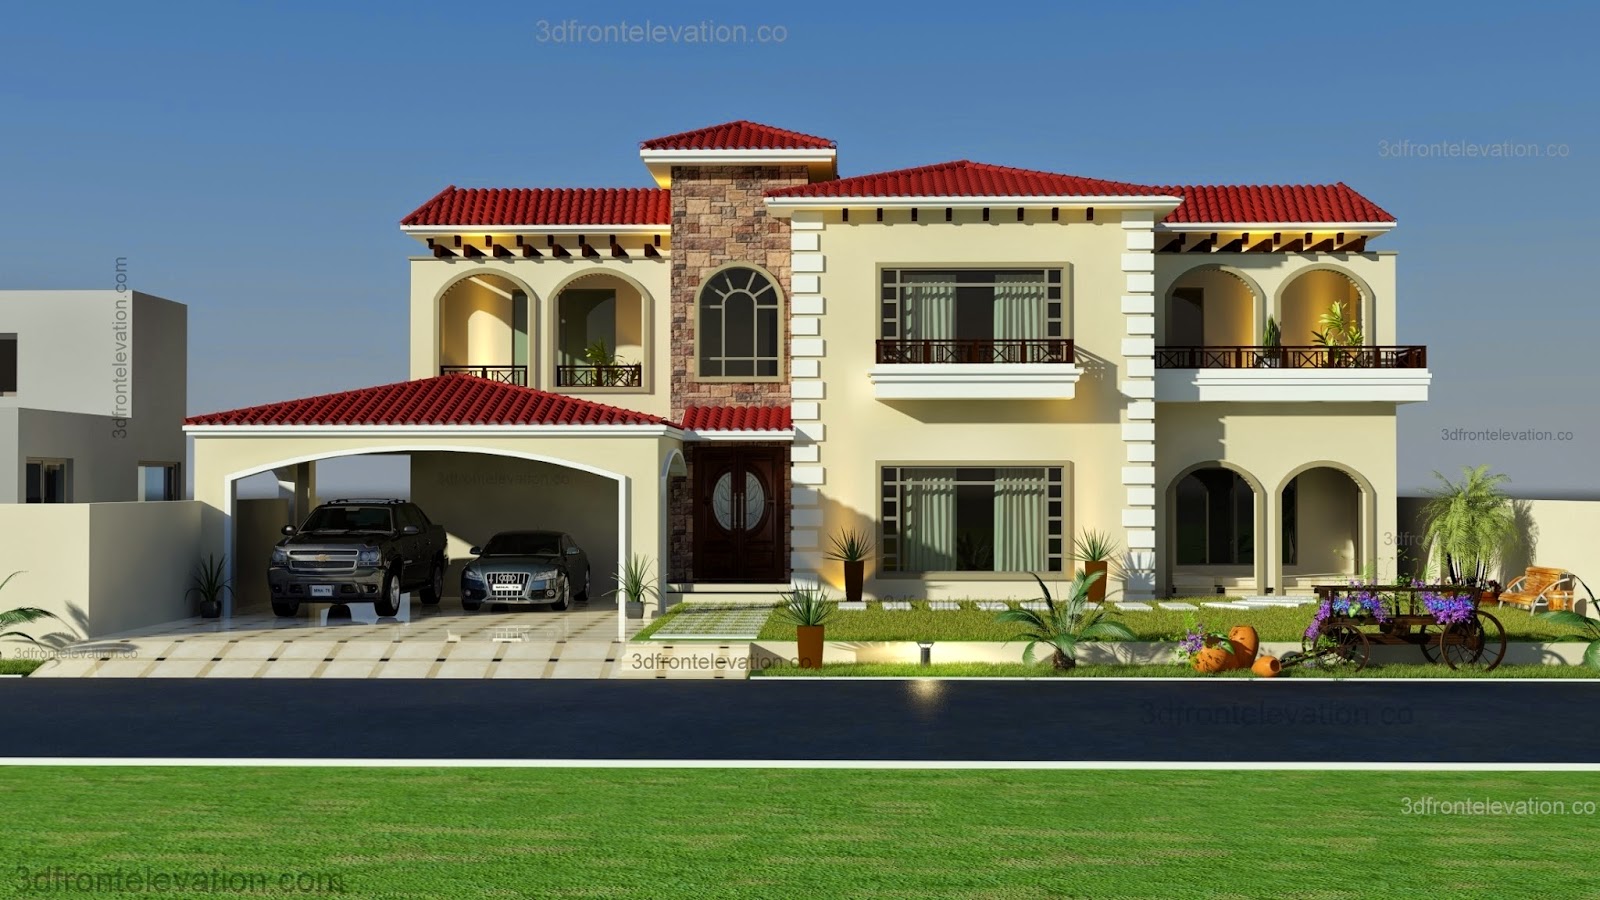 Architectural Design Of Houses In Pakistan | Modern Design